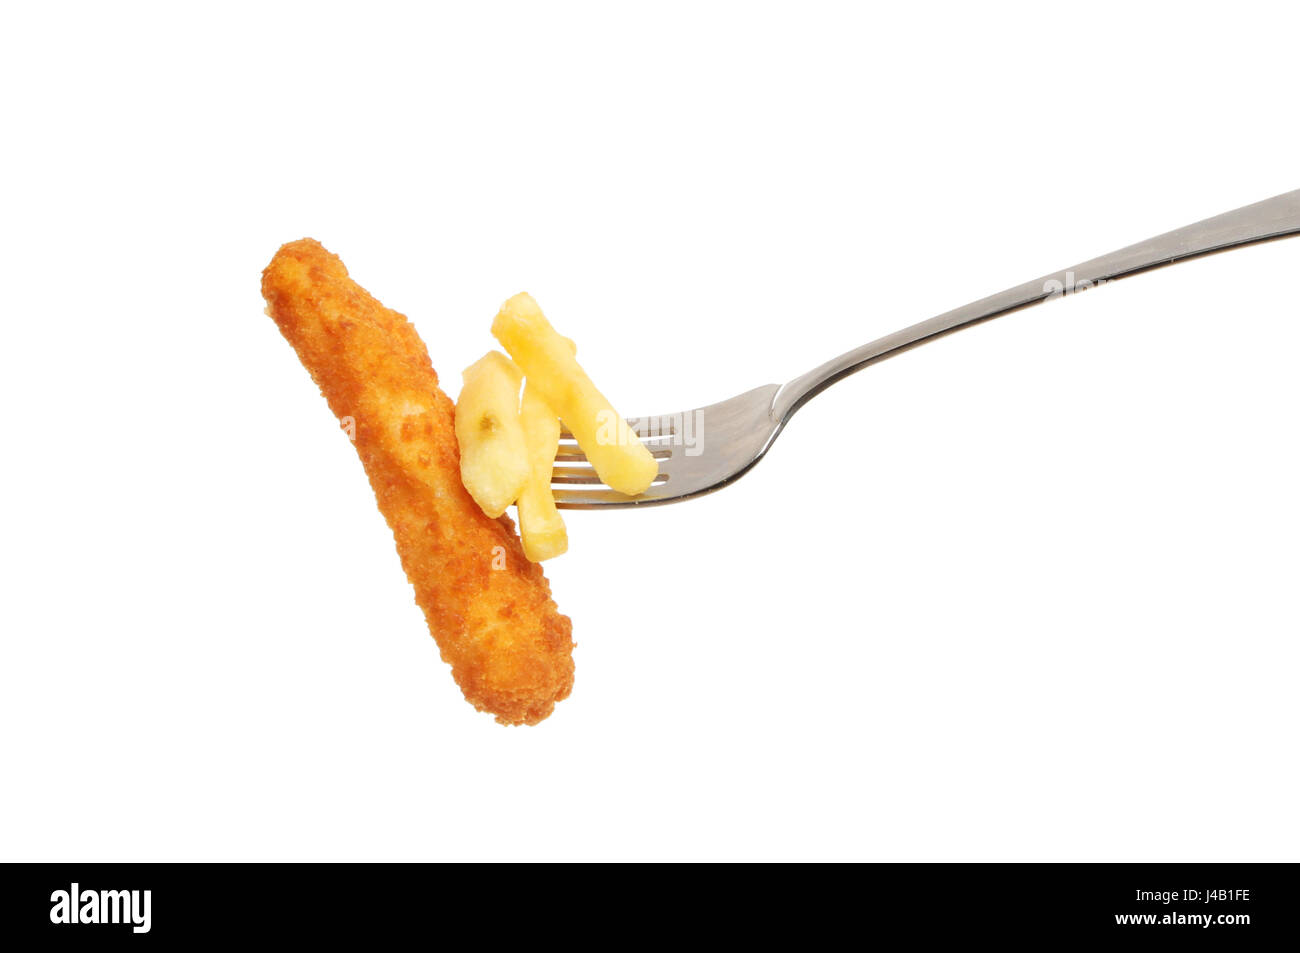 Whole fish finger with French fries on a fork isolated against white Stock Photo